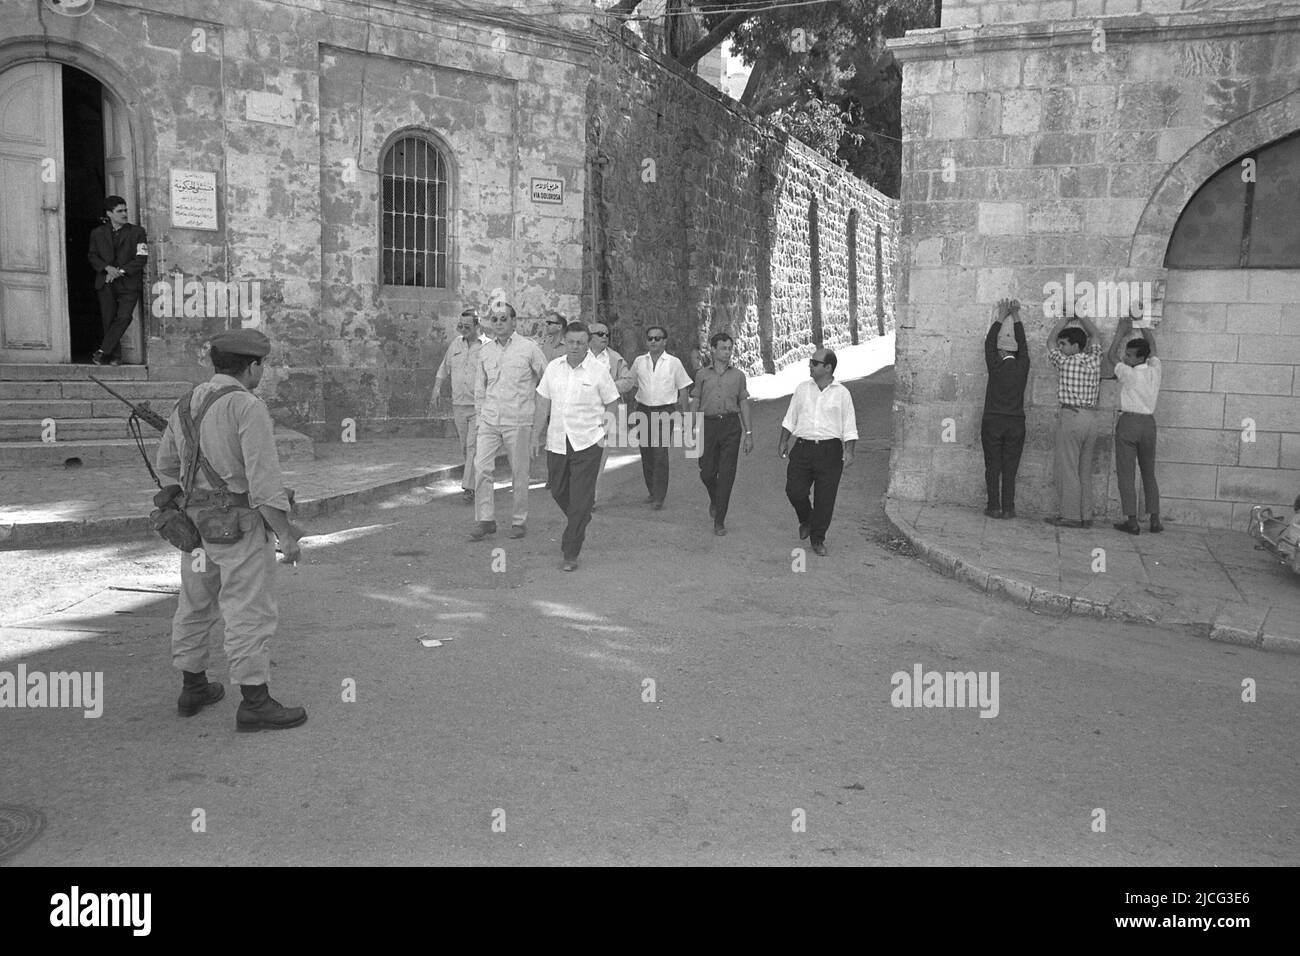 Teddy KOLLEK (withte), Israel, politician, mayor of the city of Jerusalem, walks together with Axel Caesar Cvsssar SPRINGER, Axel C. Springer, through the alleys of the old town, in the foreground on the left is a soldier with a gun, on the right at the wall are civilians with raised arms Hands, black and white photo, landscape format, June 14, 1967. ¬ Stock Photo